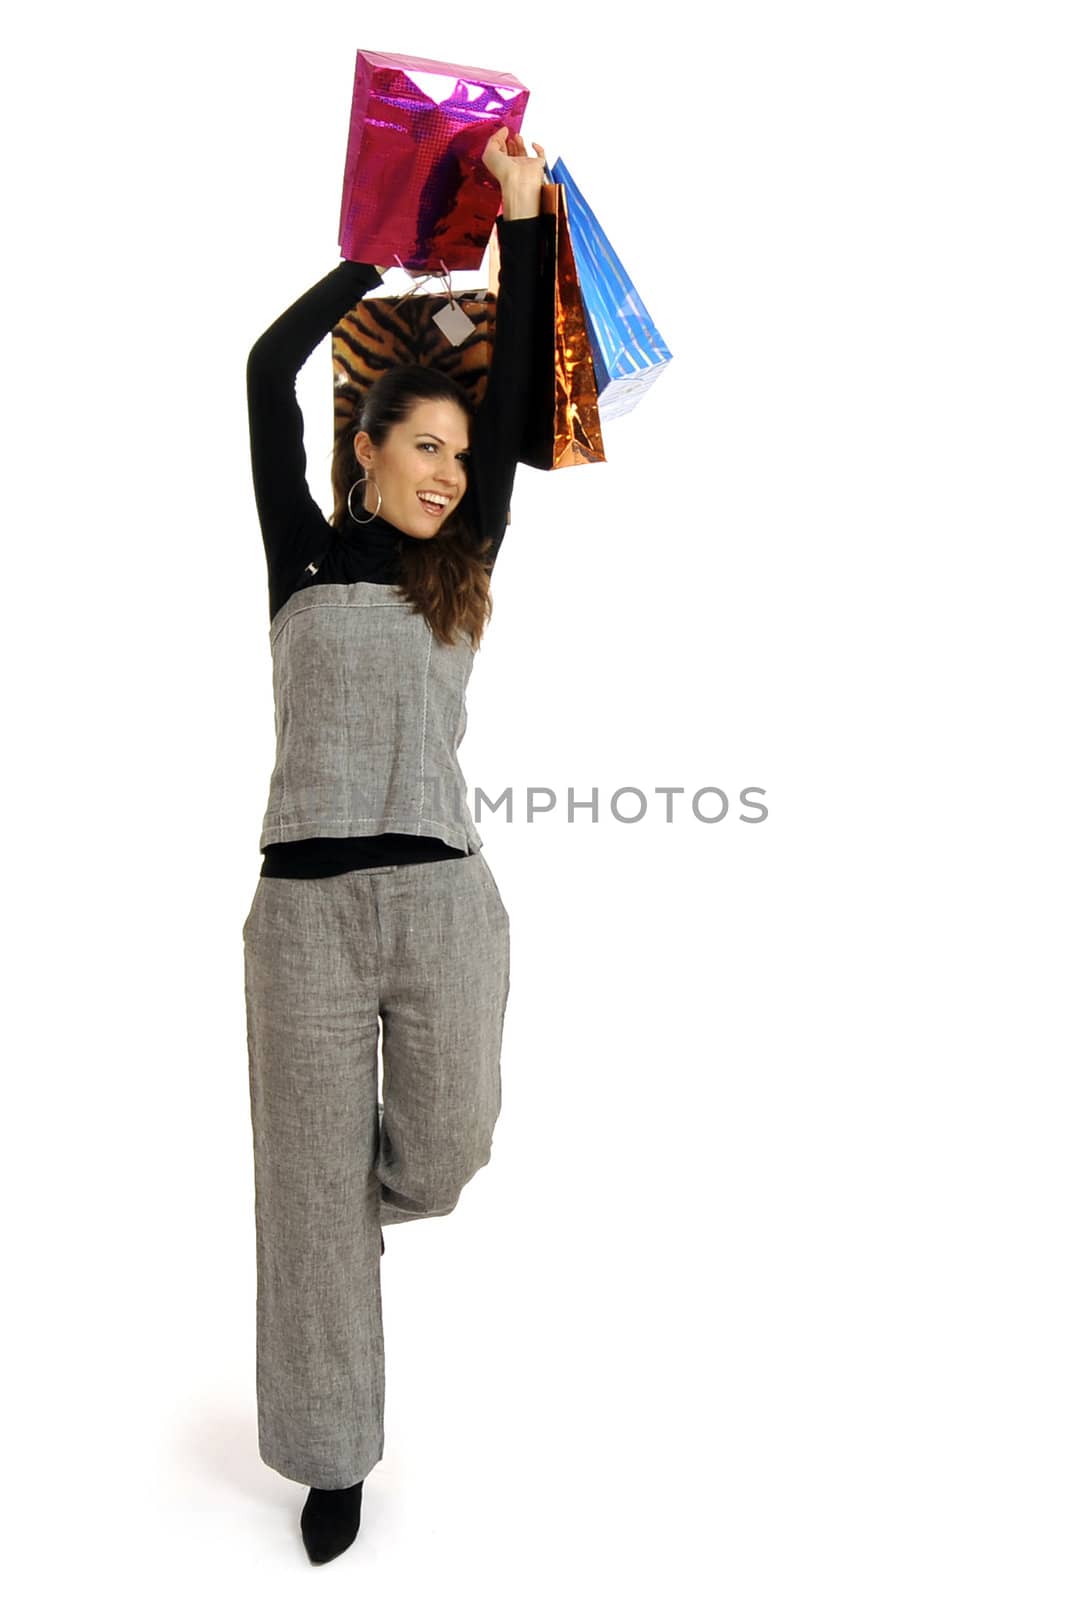 Full body view of young attractive woman in business wear,  going shopping with lots of colorful shopping bags. Isolated on white background.